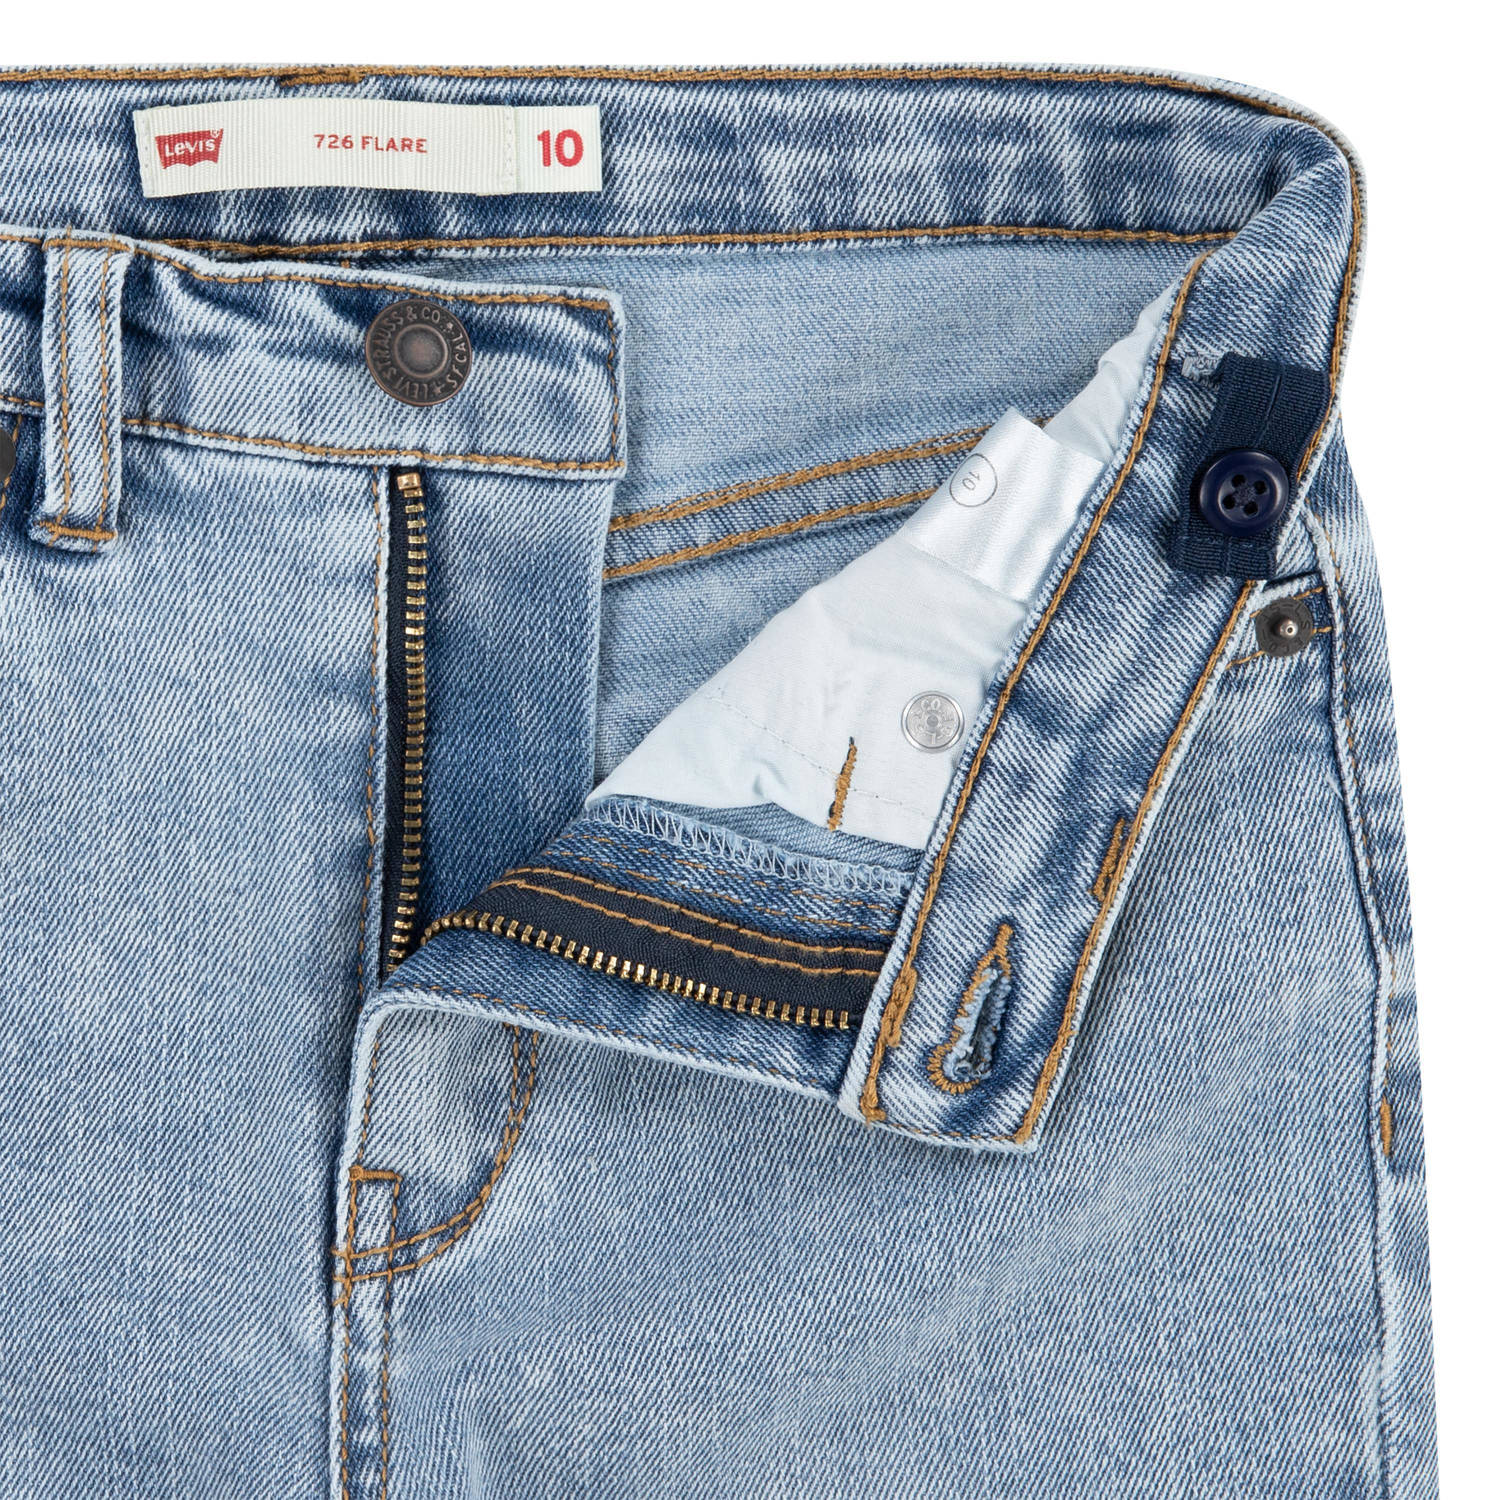 Levi's Kids 726 high waist flared jeans be cool without destruction